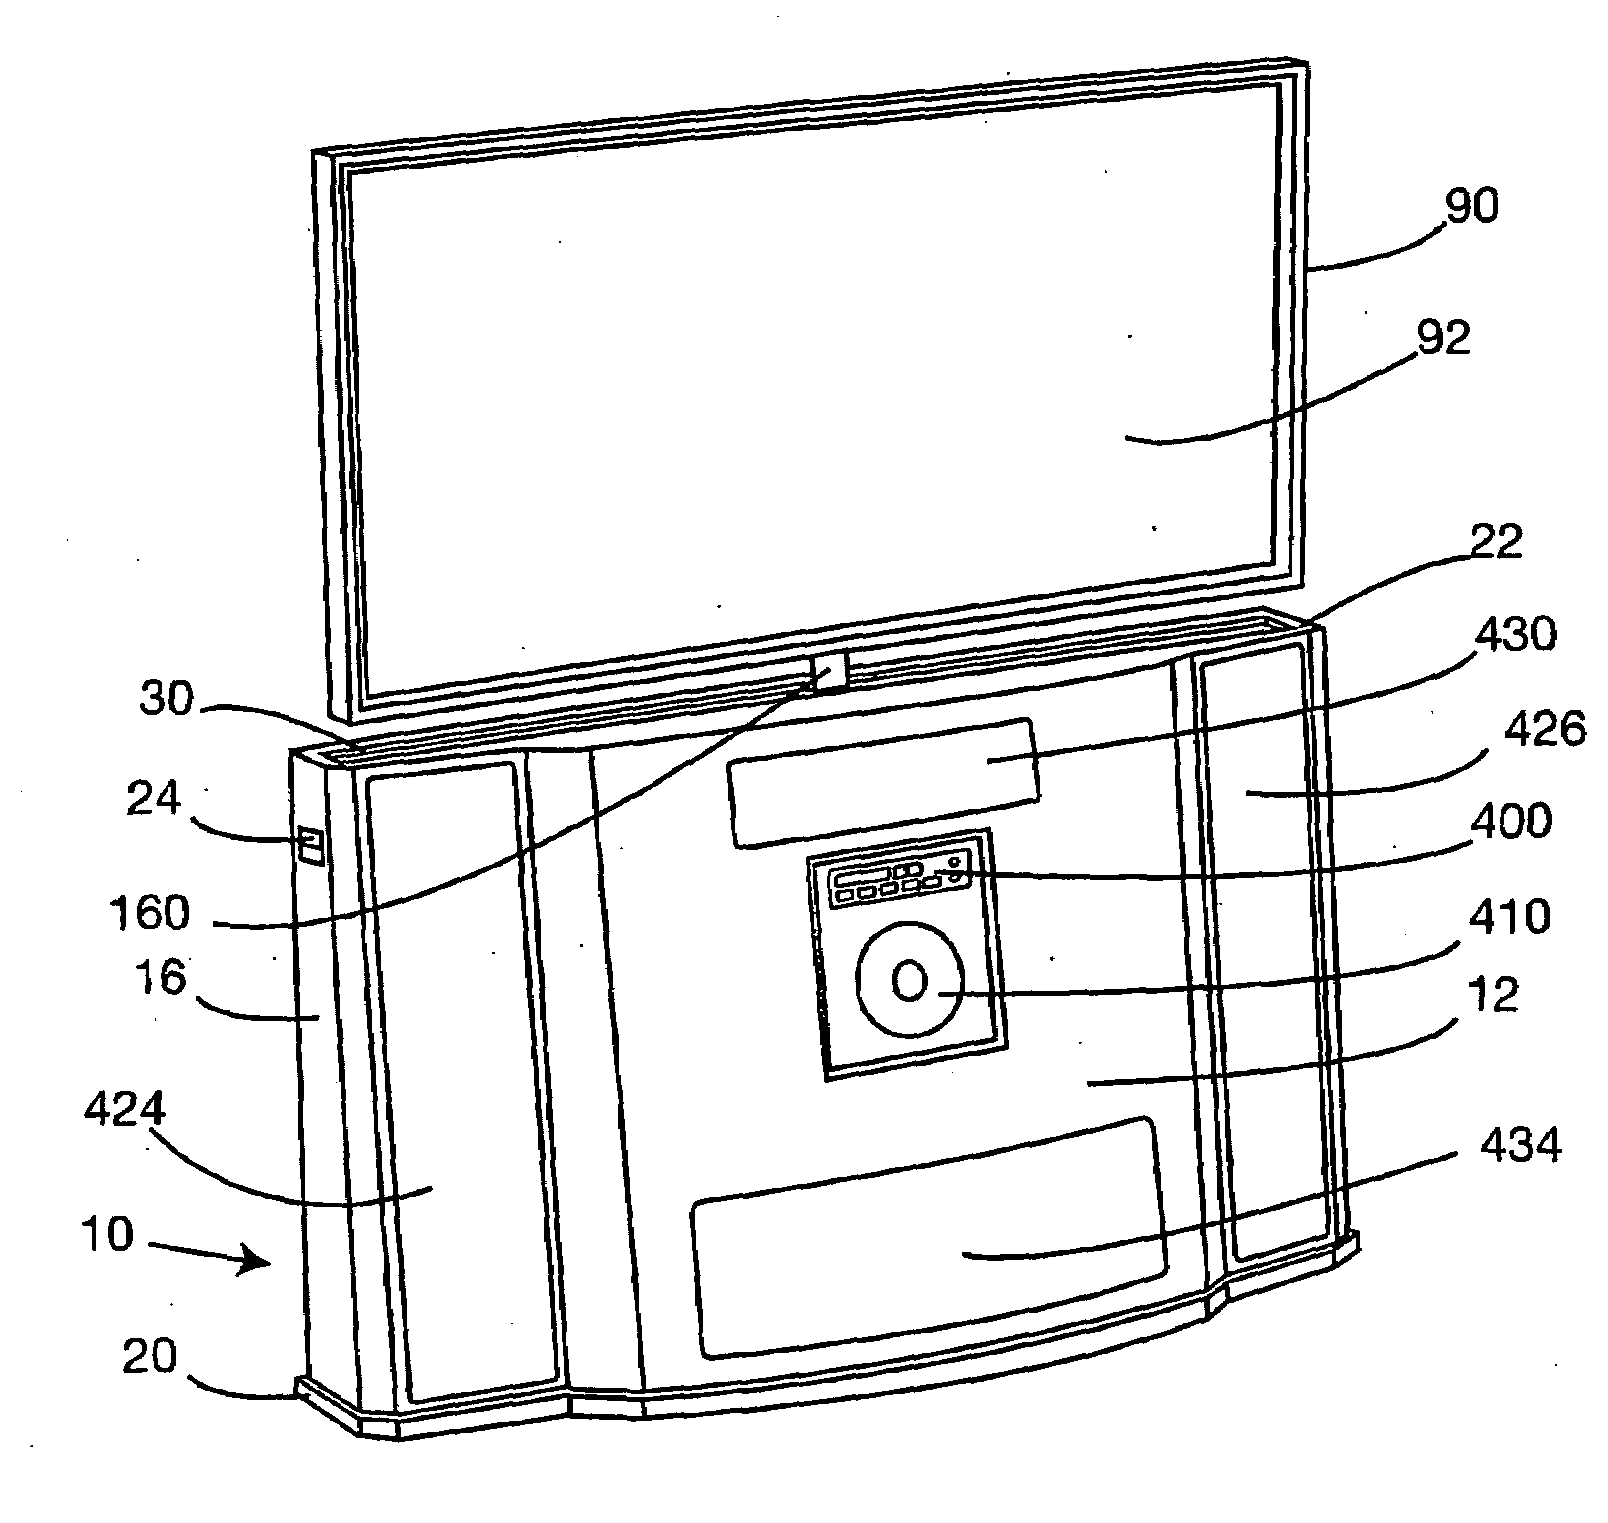 Apparatus for supporting an audio/video system which includes a thin screen video display unit